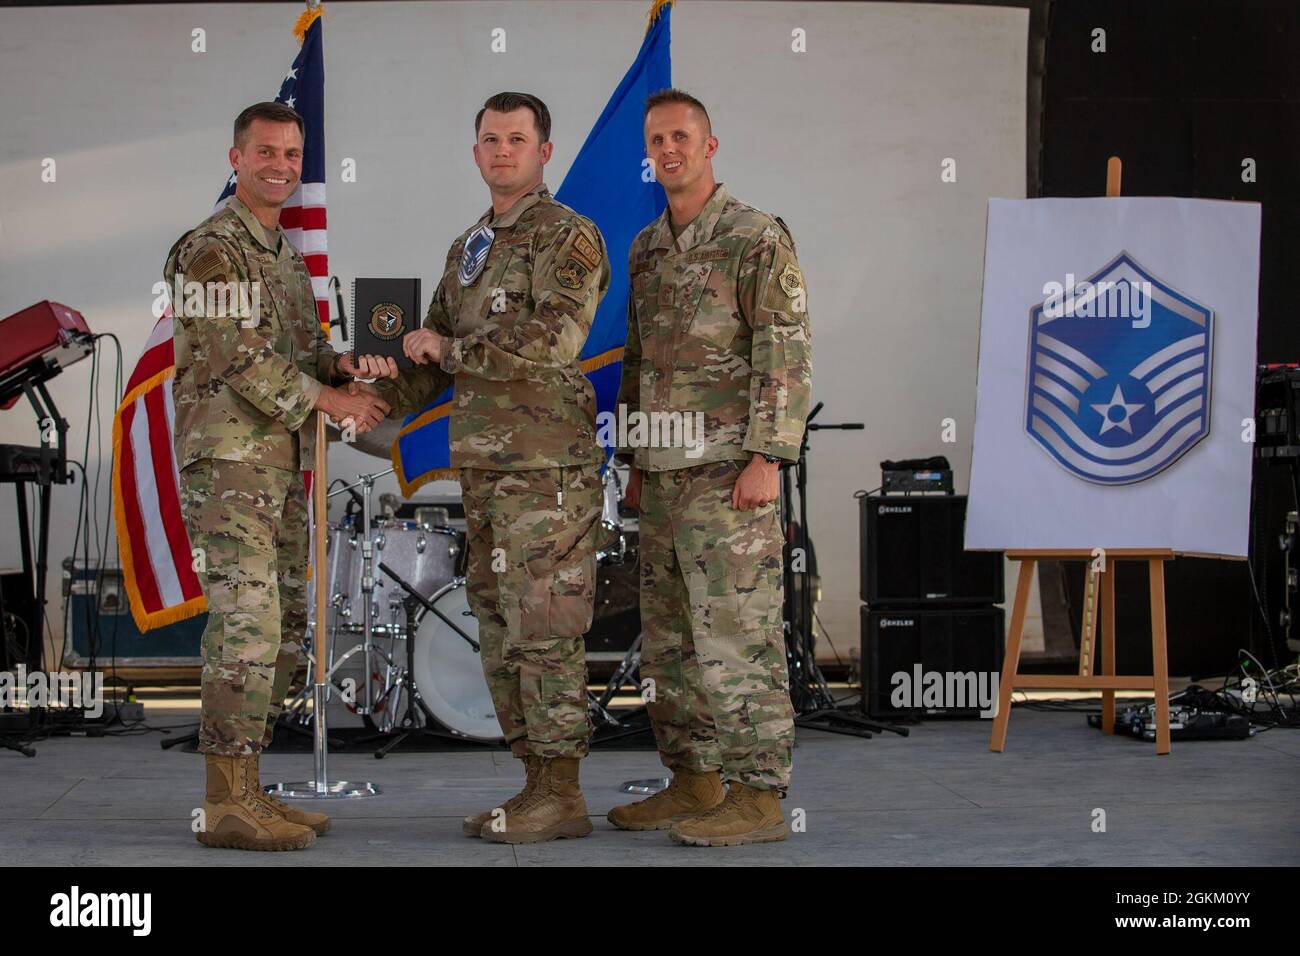 U.S. Air Force Brig. Gen. Larry R. Broadwell, 380th Air Expeditionary Wing commander (AEW), and Chief Master Sgt. Joshua J. Wiener, 380th AEW command chief, pose with Tech. Sgt. Kenneth Dunn, 380th Expeditionary Civil Engineer Squadron, at Al Dhafra Air Base (ADAB), United Arab Emirates, May 21, 2021. Dunn is one of 19 team ADAB technical sergeants that were selected for promoted to master sergeant this year. Stock Photo